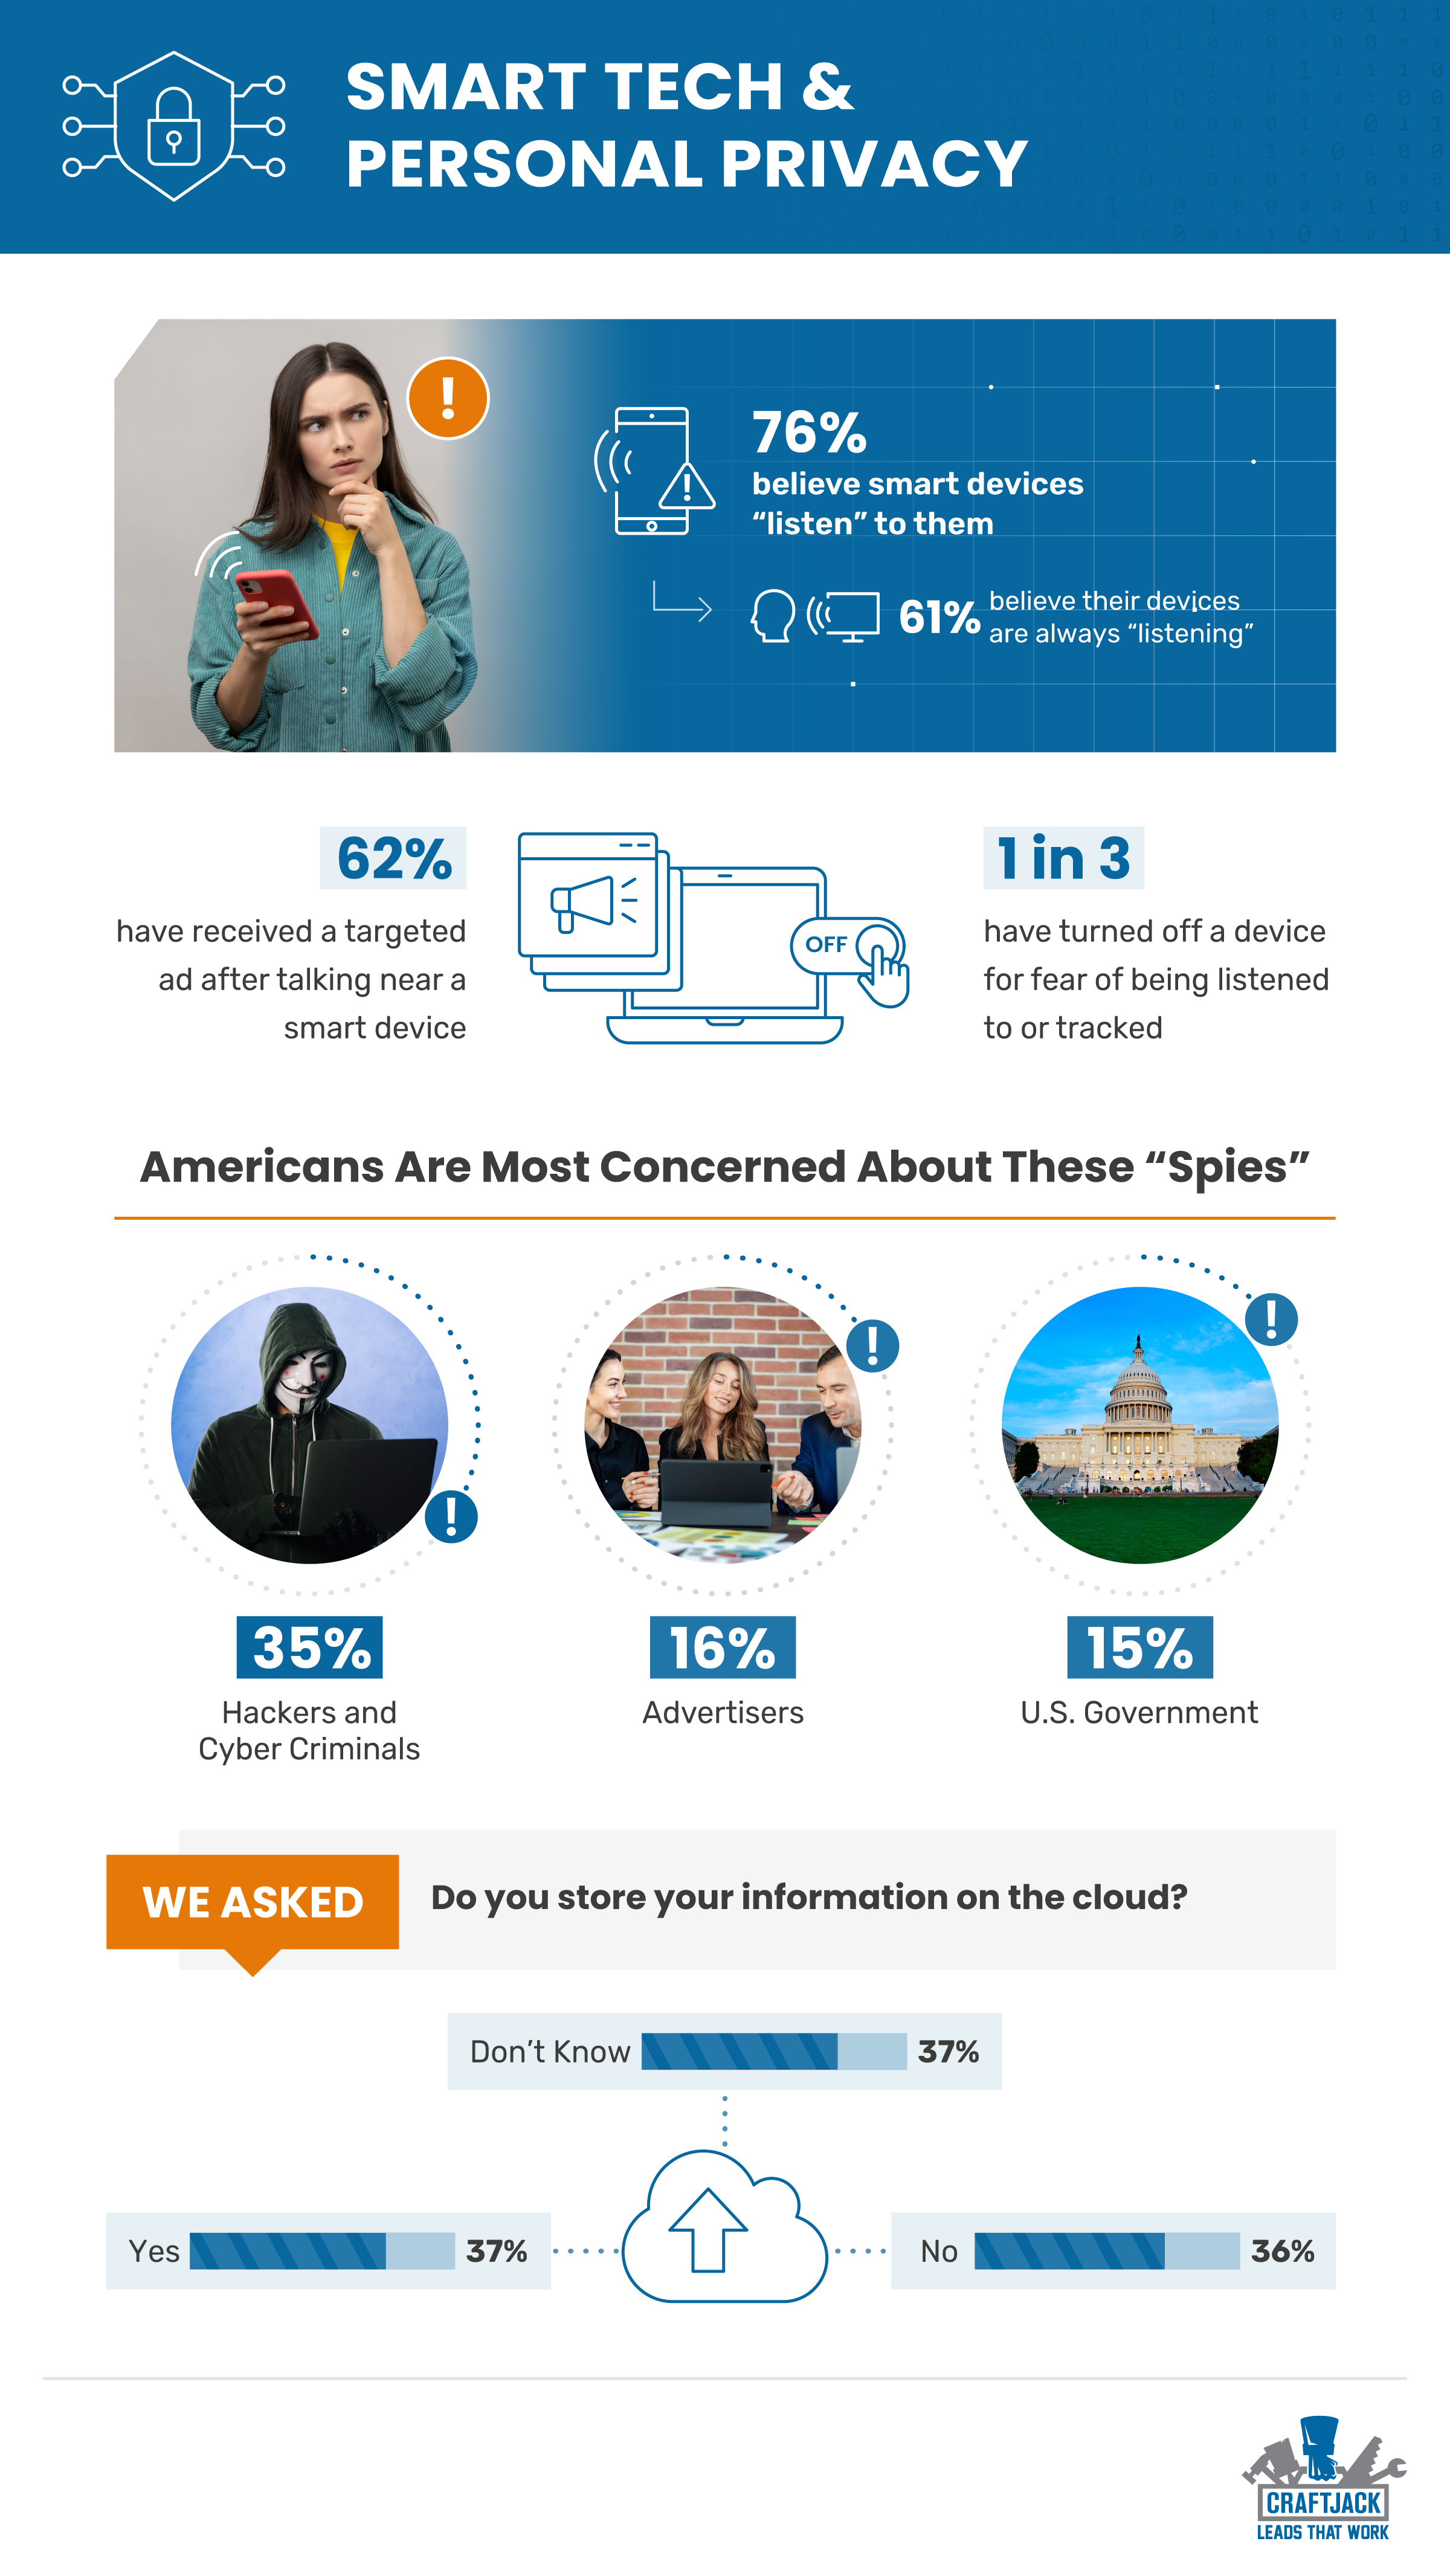 61% of Americans think their devices are “always” listening